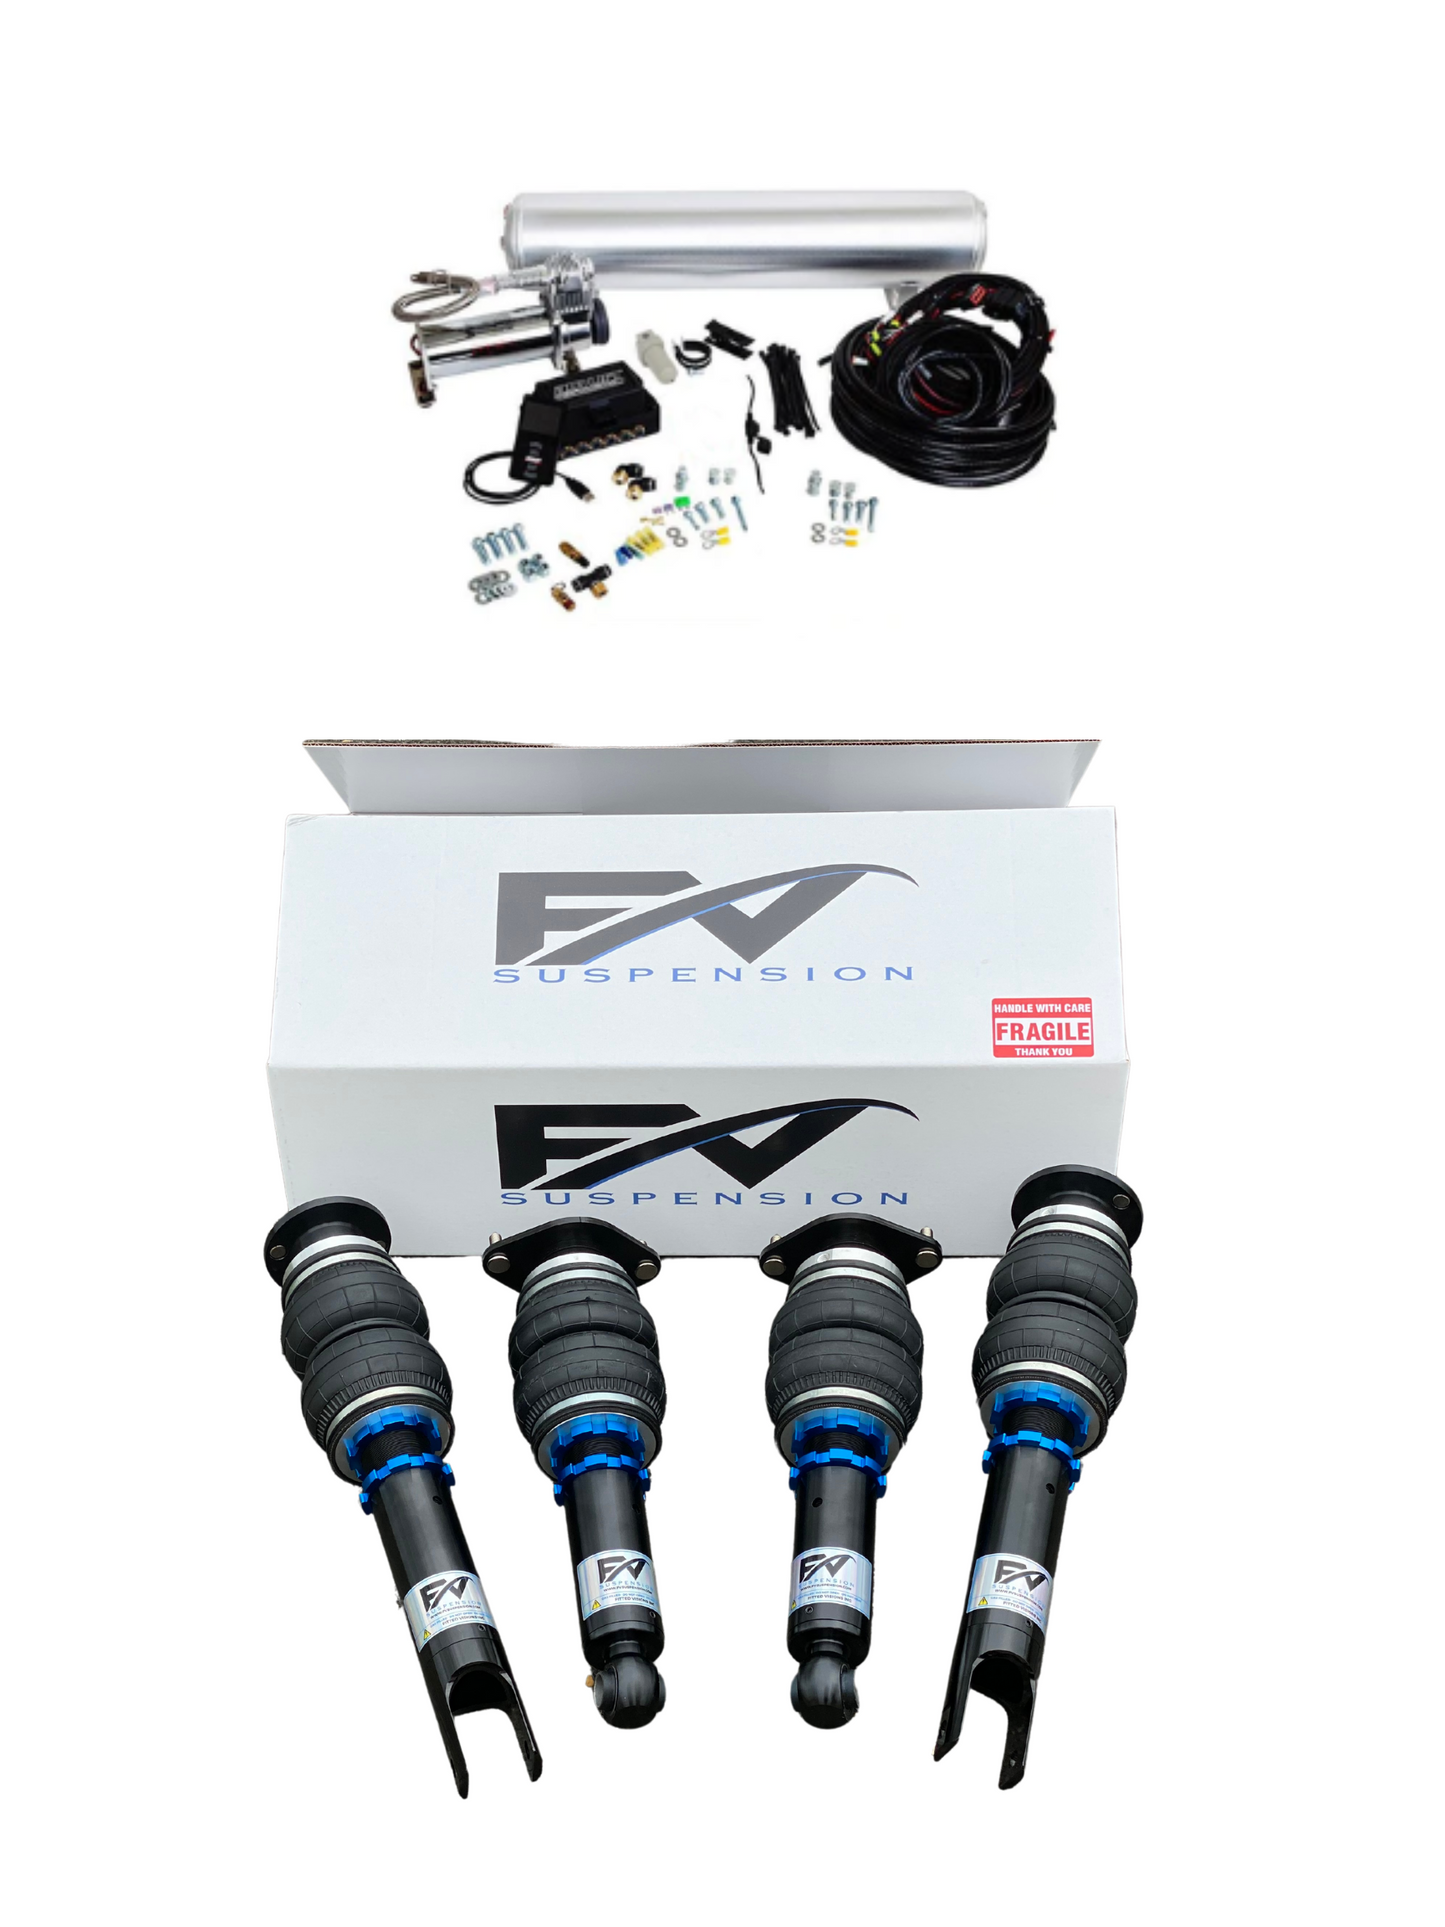 FV Suspension 3P Tier 2 Complete Air Ride kit for 2014+ BMW 4 Series Coupe - FVALtier2kit142